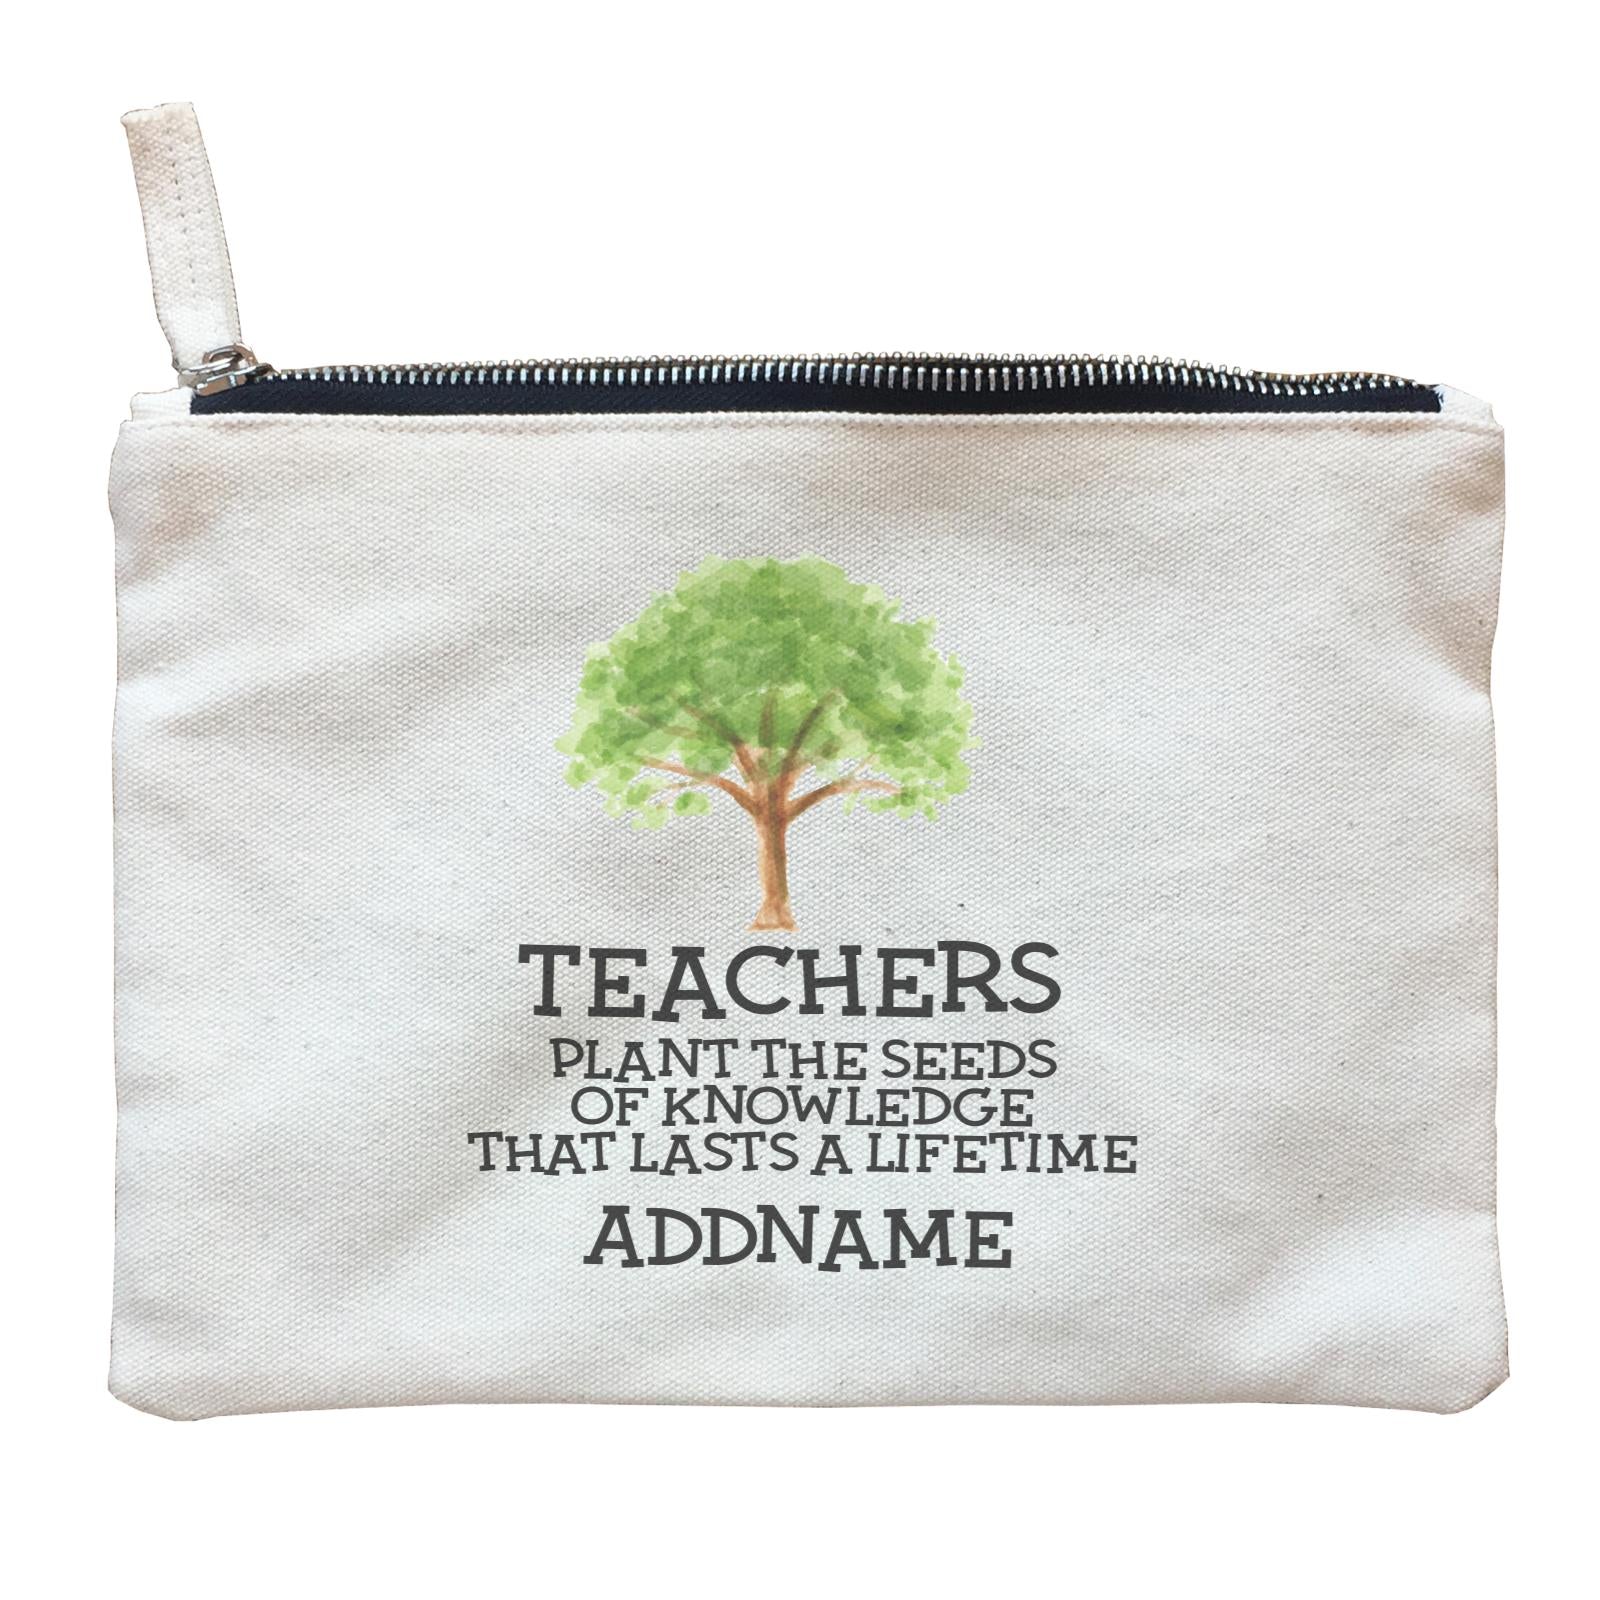 Teacher Quotes 2 Teachers Plant The Seeds Of Knowledge That Lasts A Lifetime Addname Zipper Pouch